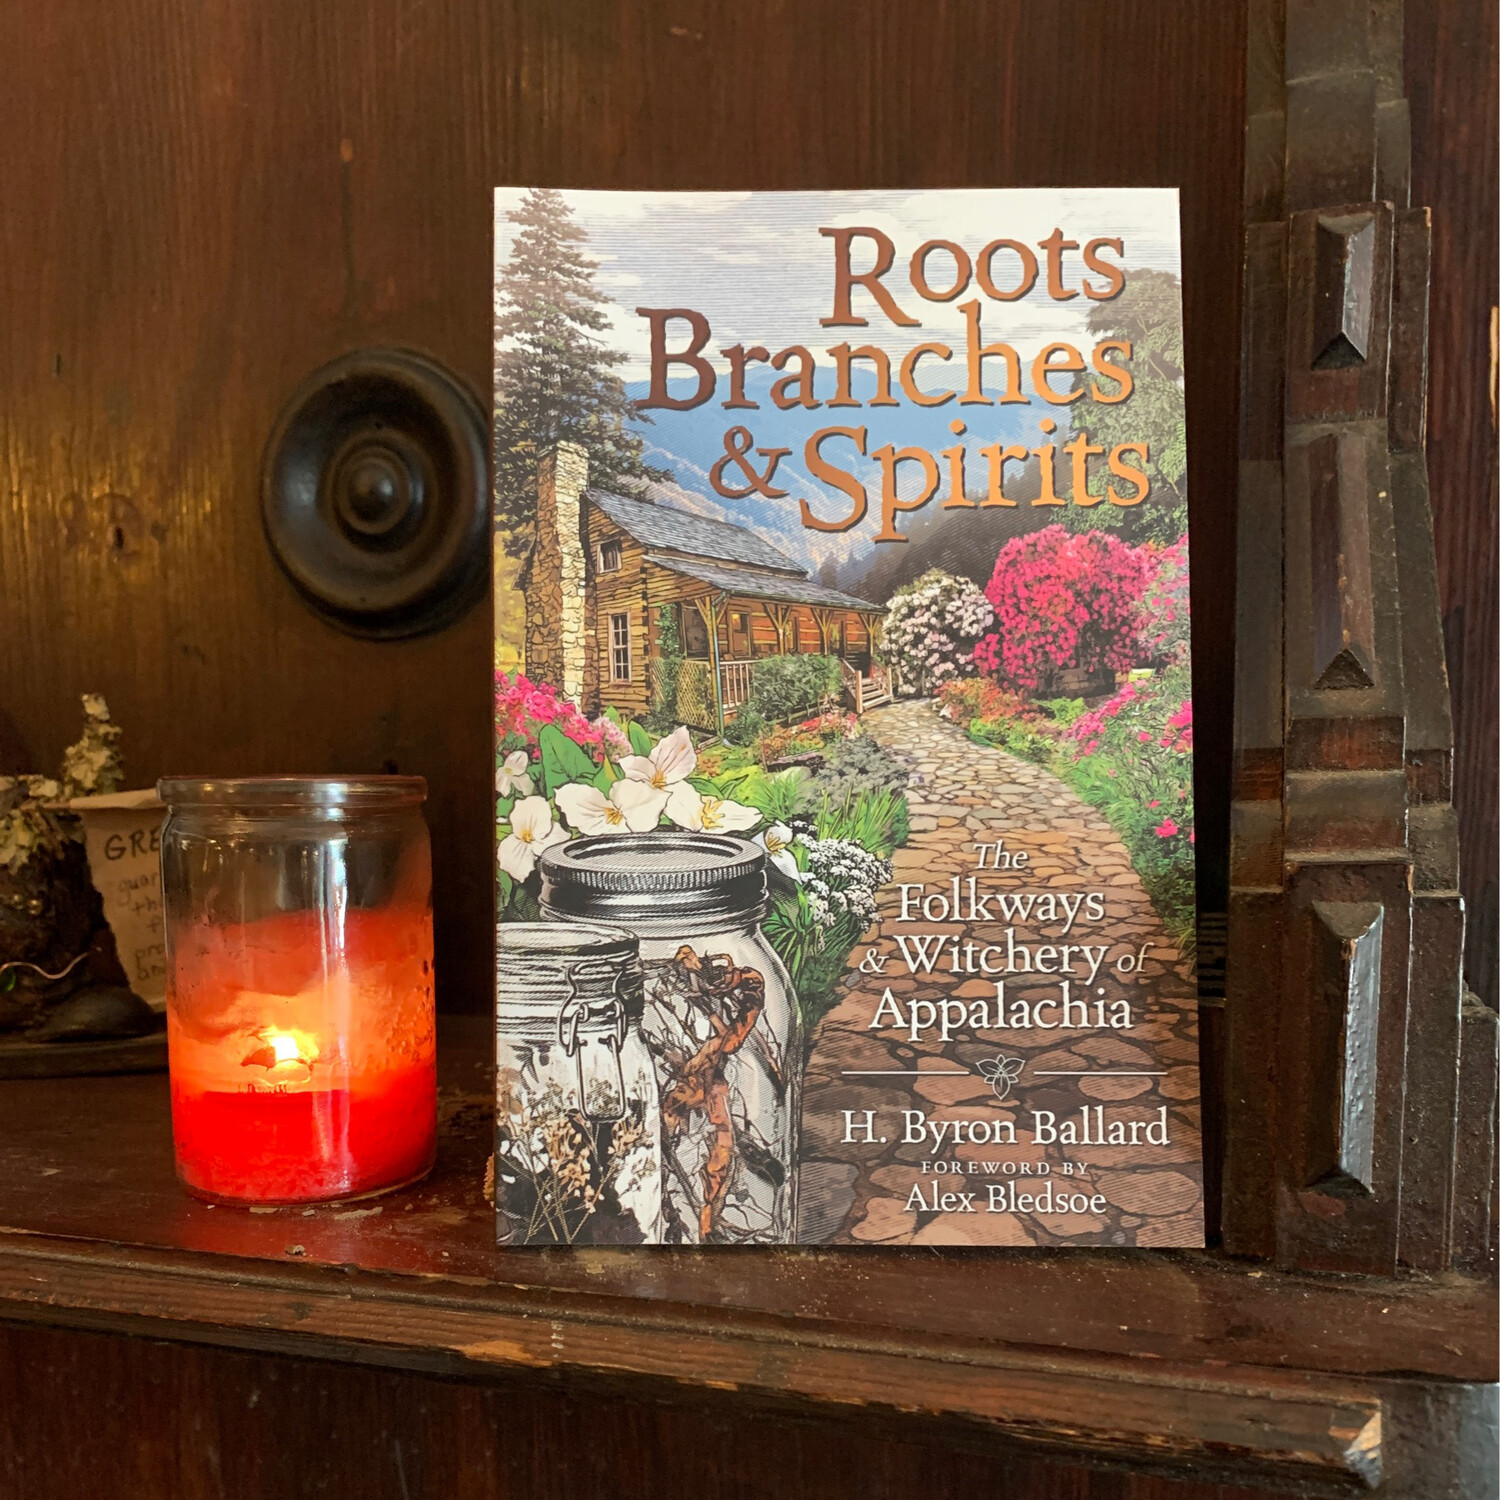 Roots, Branches and Spirits